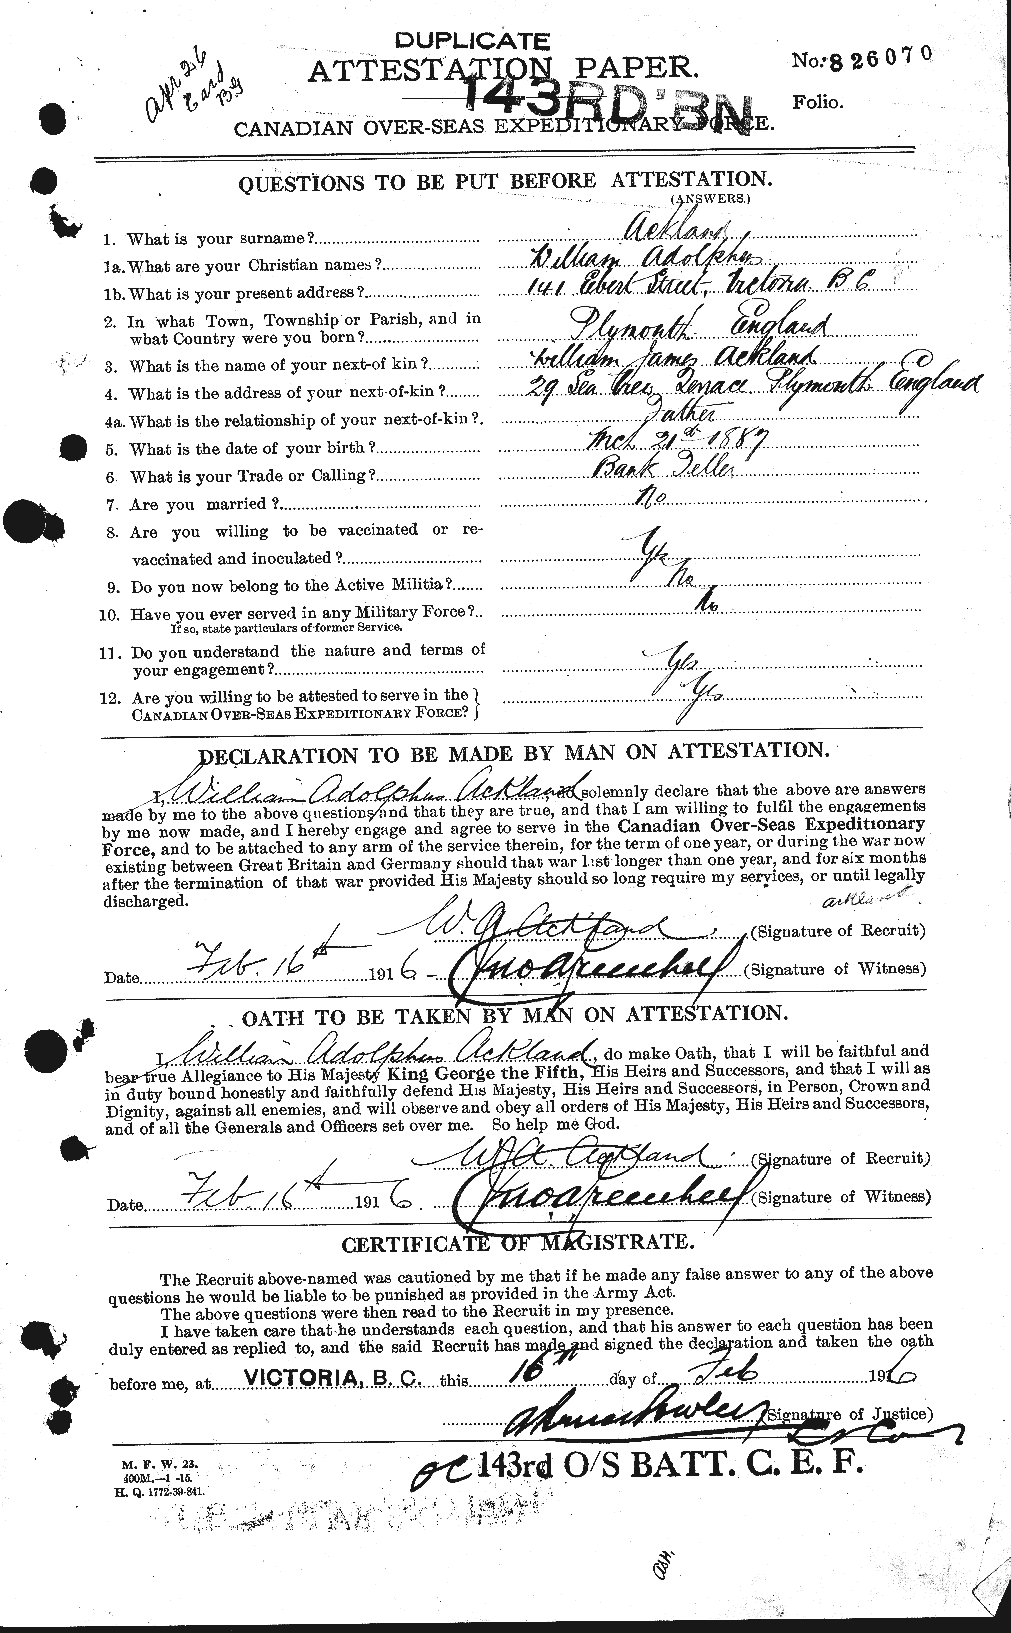 Personnel Records of the First World War - CEF 200693a